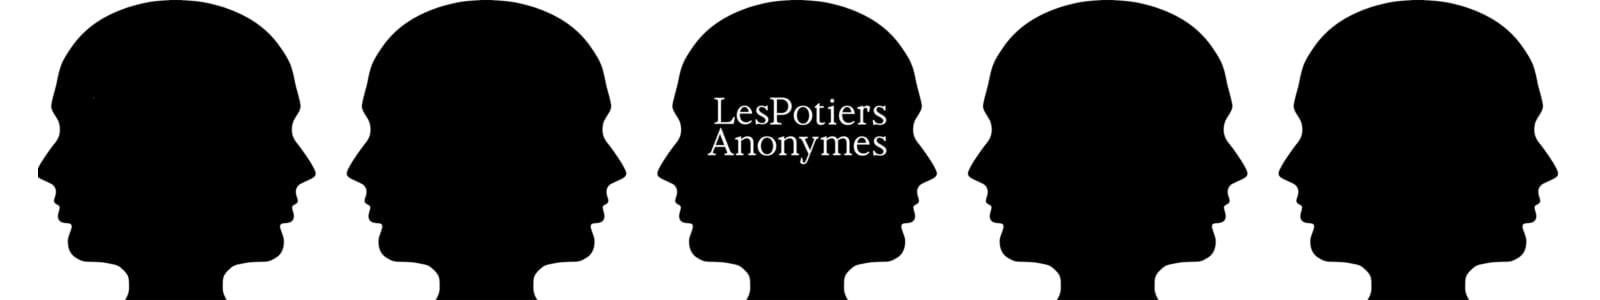 Les Potiers Anonymes